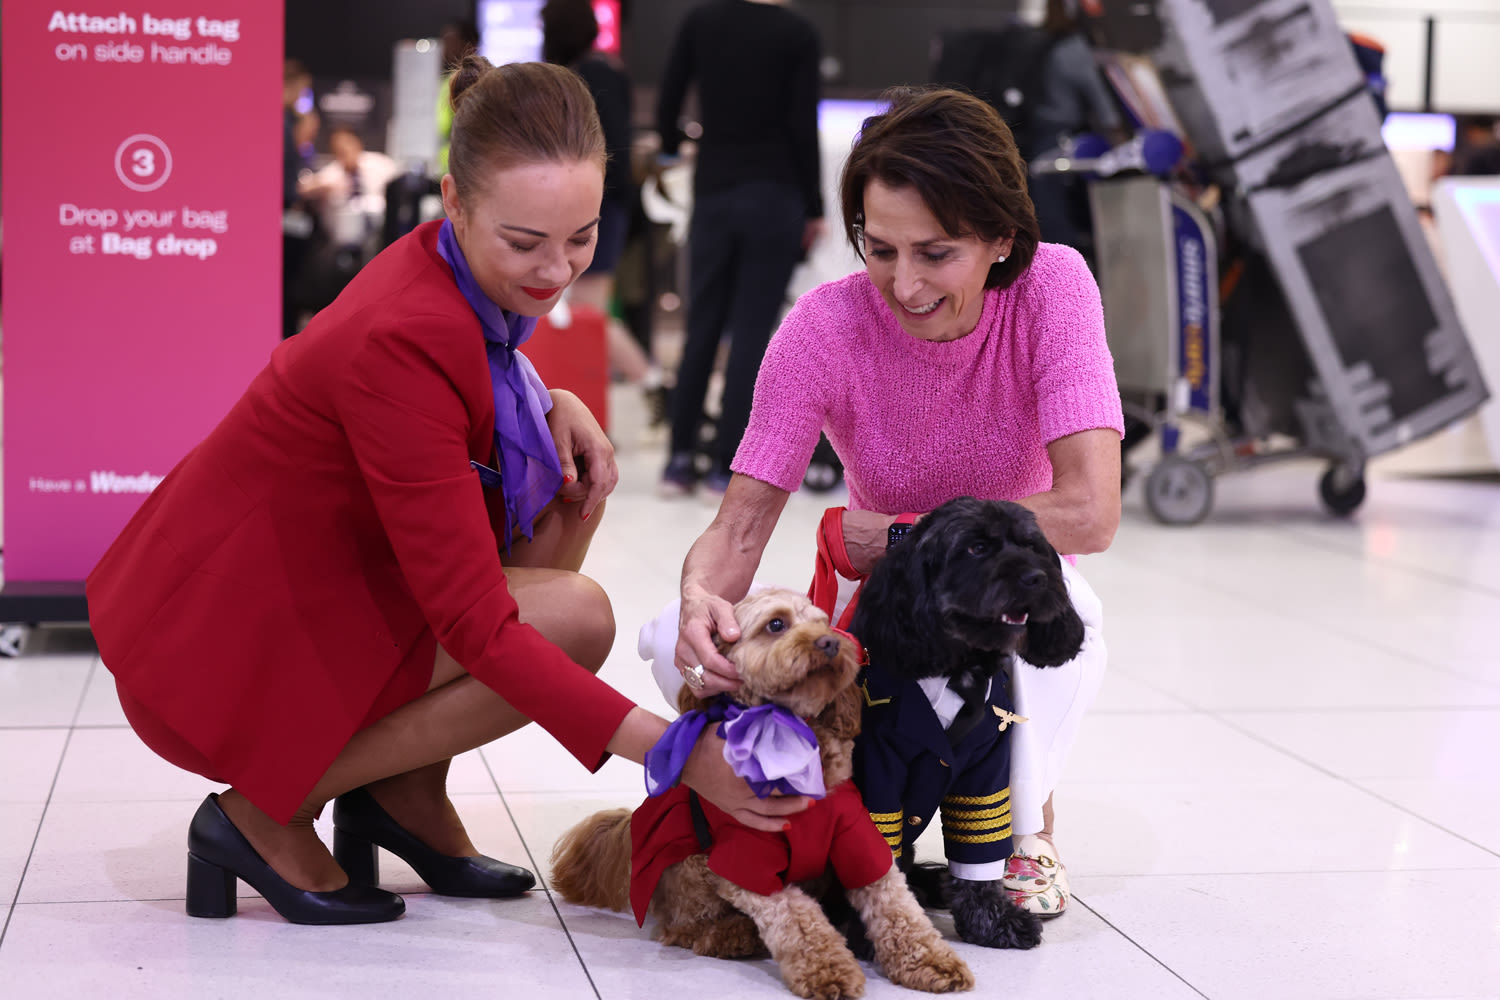 Virgin Australia CEO Jayne Hrdlicka and a Virgin Australia cabin crew member with two dogs dressed in Virgin Australia uniforms at an airport